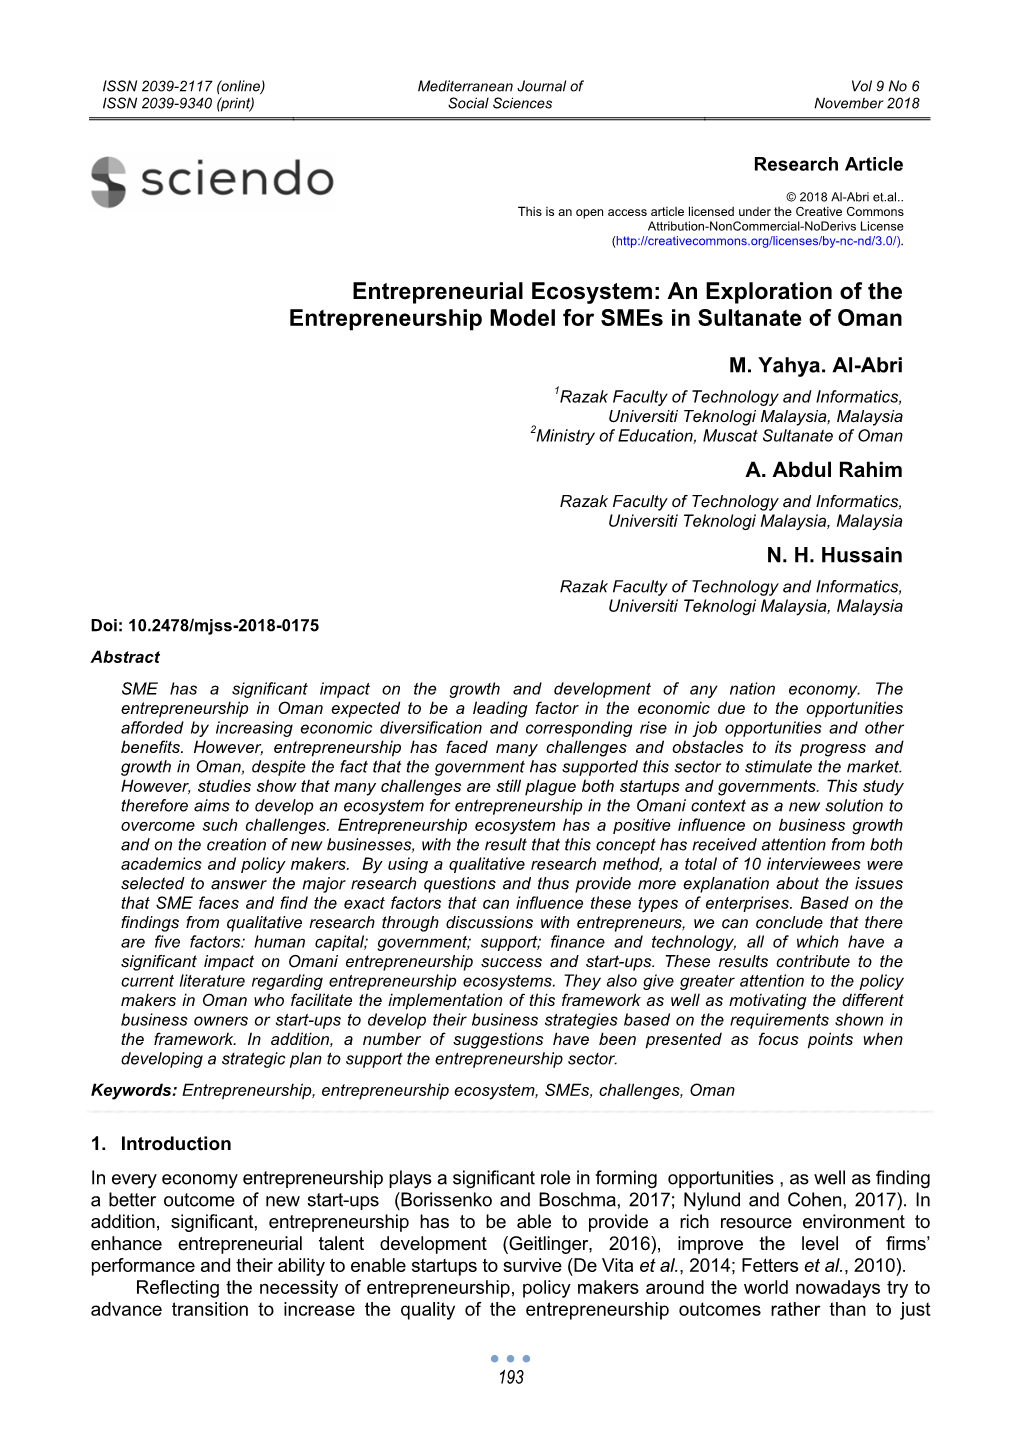 Entrepreneurial Ecosystem: an Exploration of the Entrepreneurship Model for Smes in Sultanate of Oman